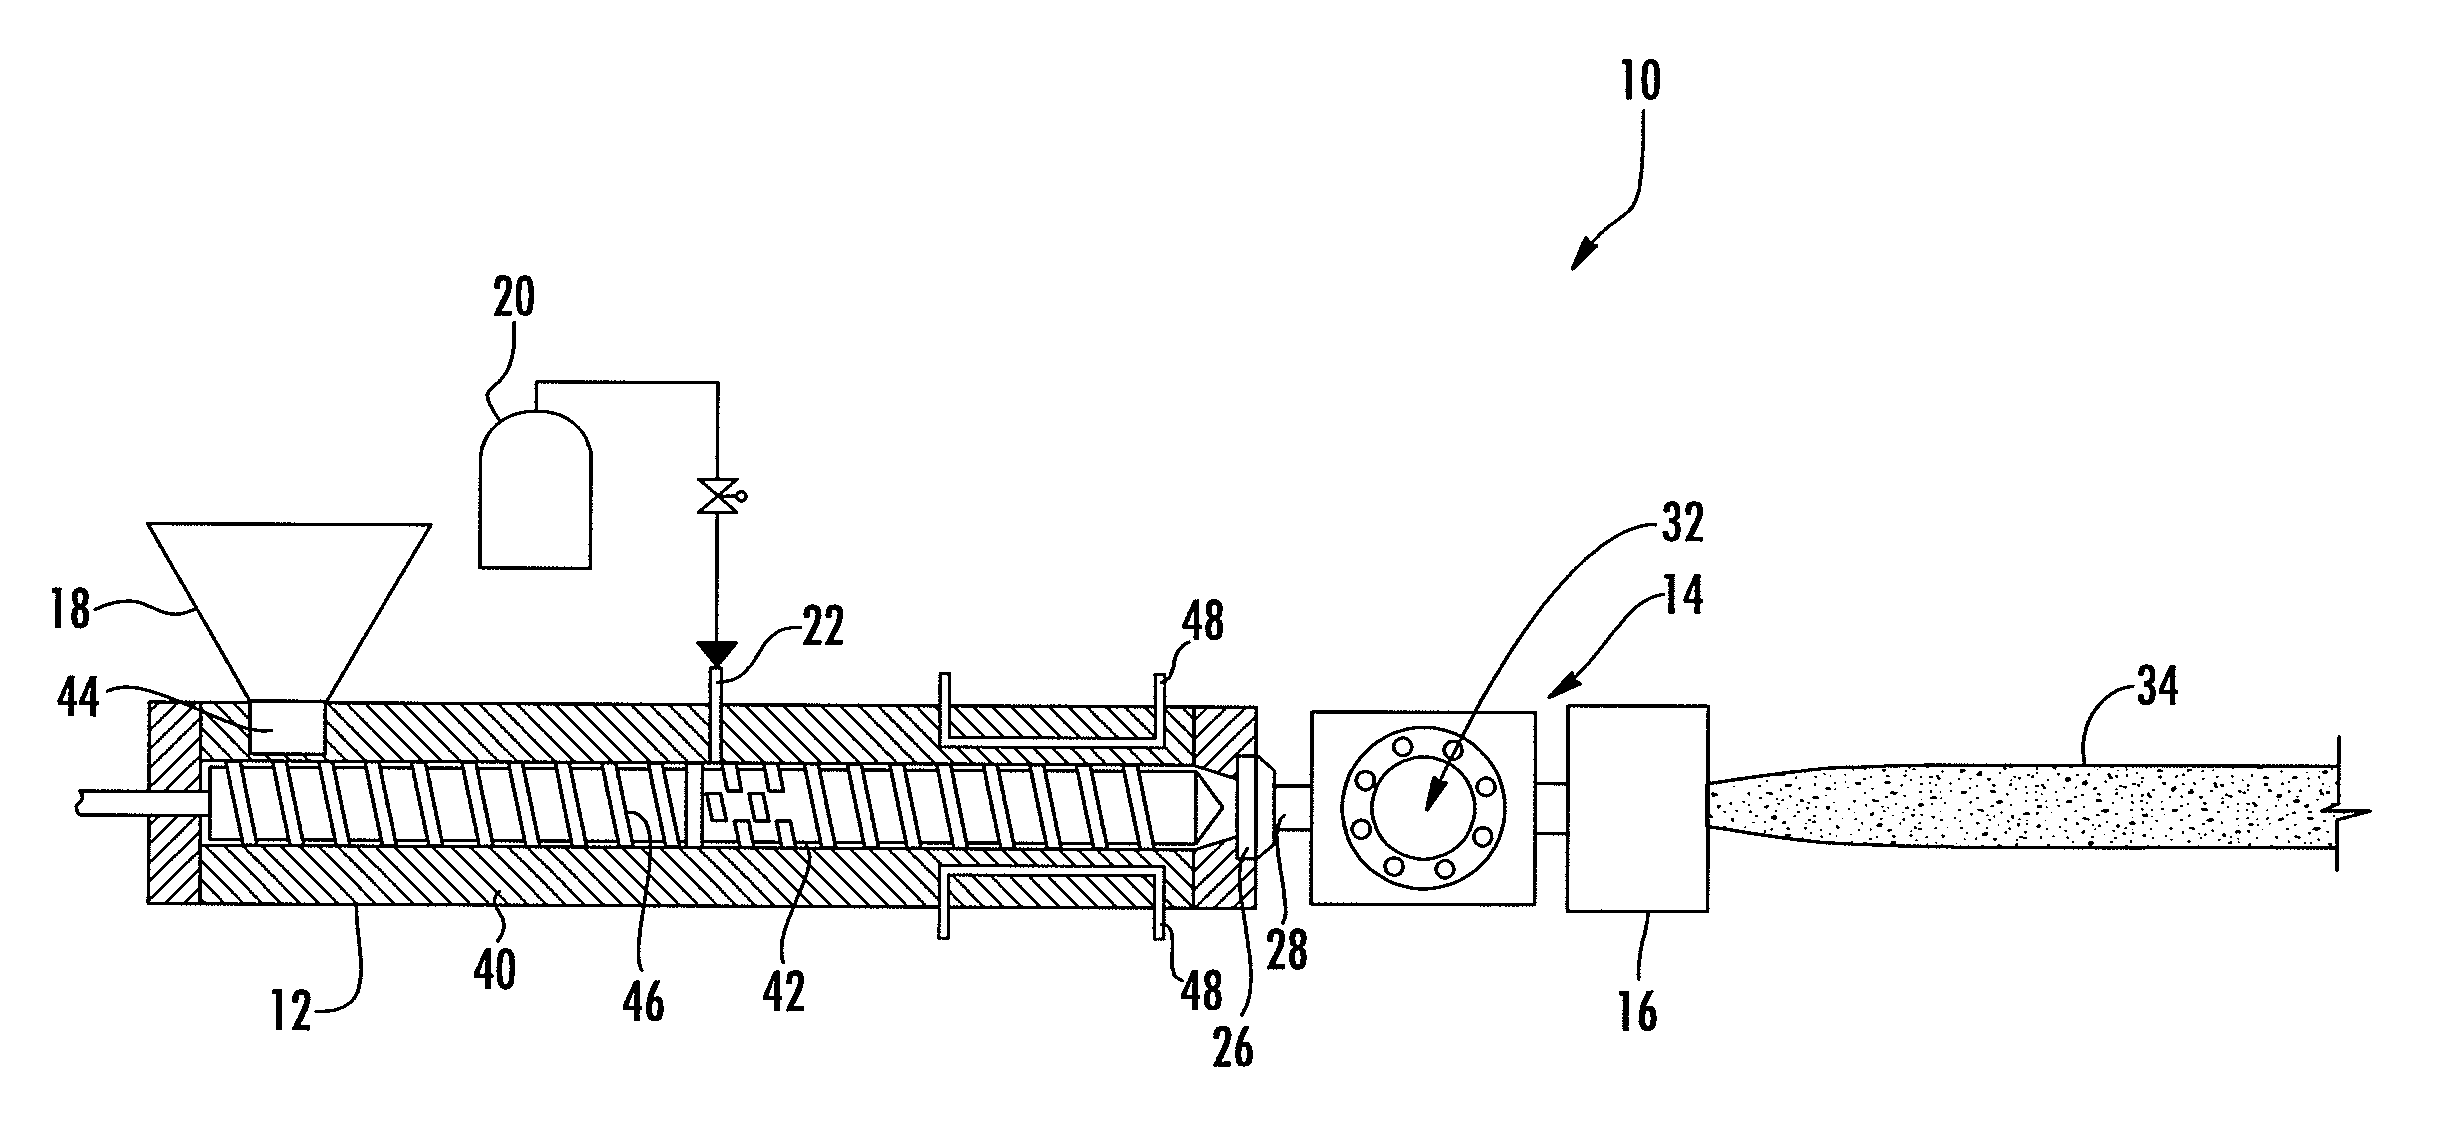 Apparatus and Method for Preparing a UV-Induced Crosslinked Foam